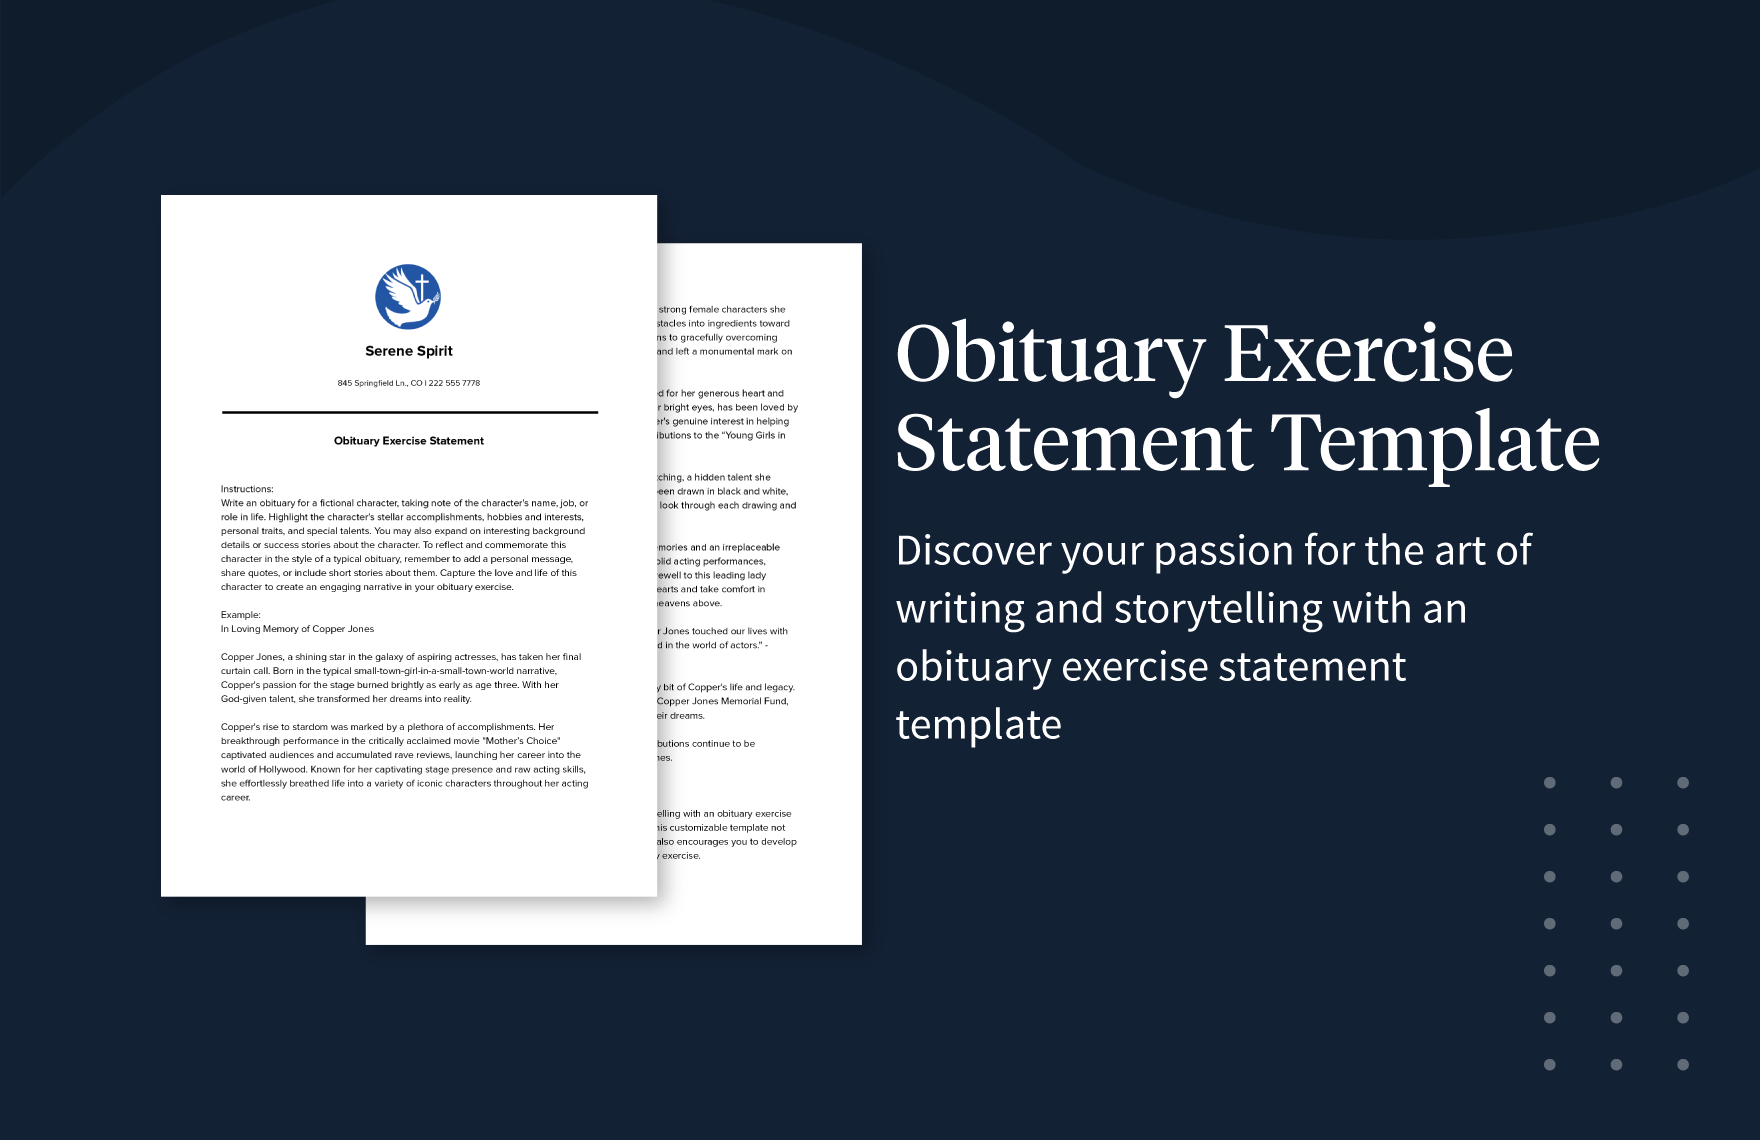 Obituary Exercise Statement Template